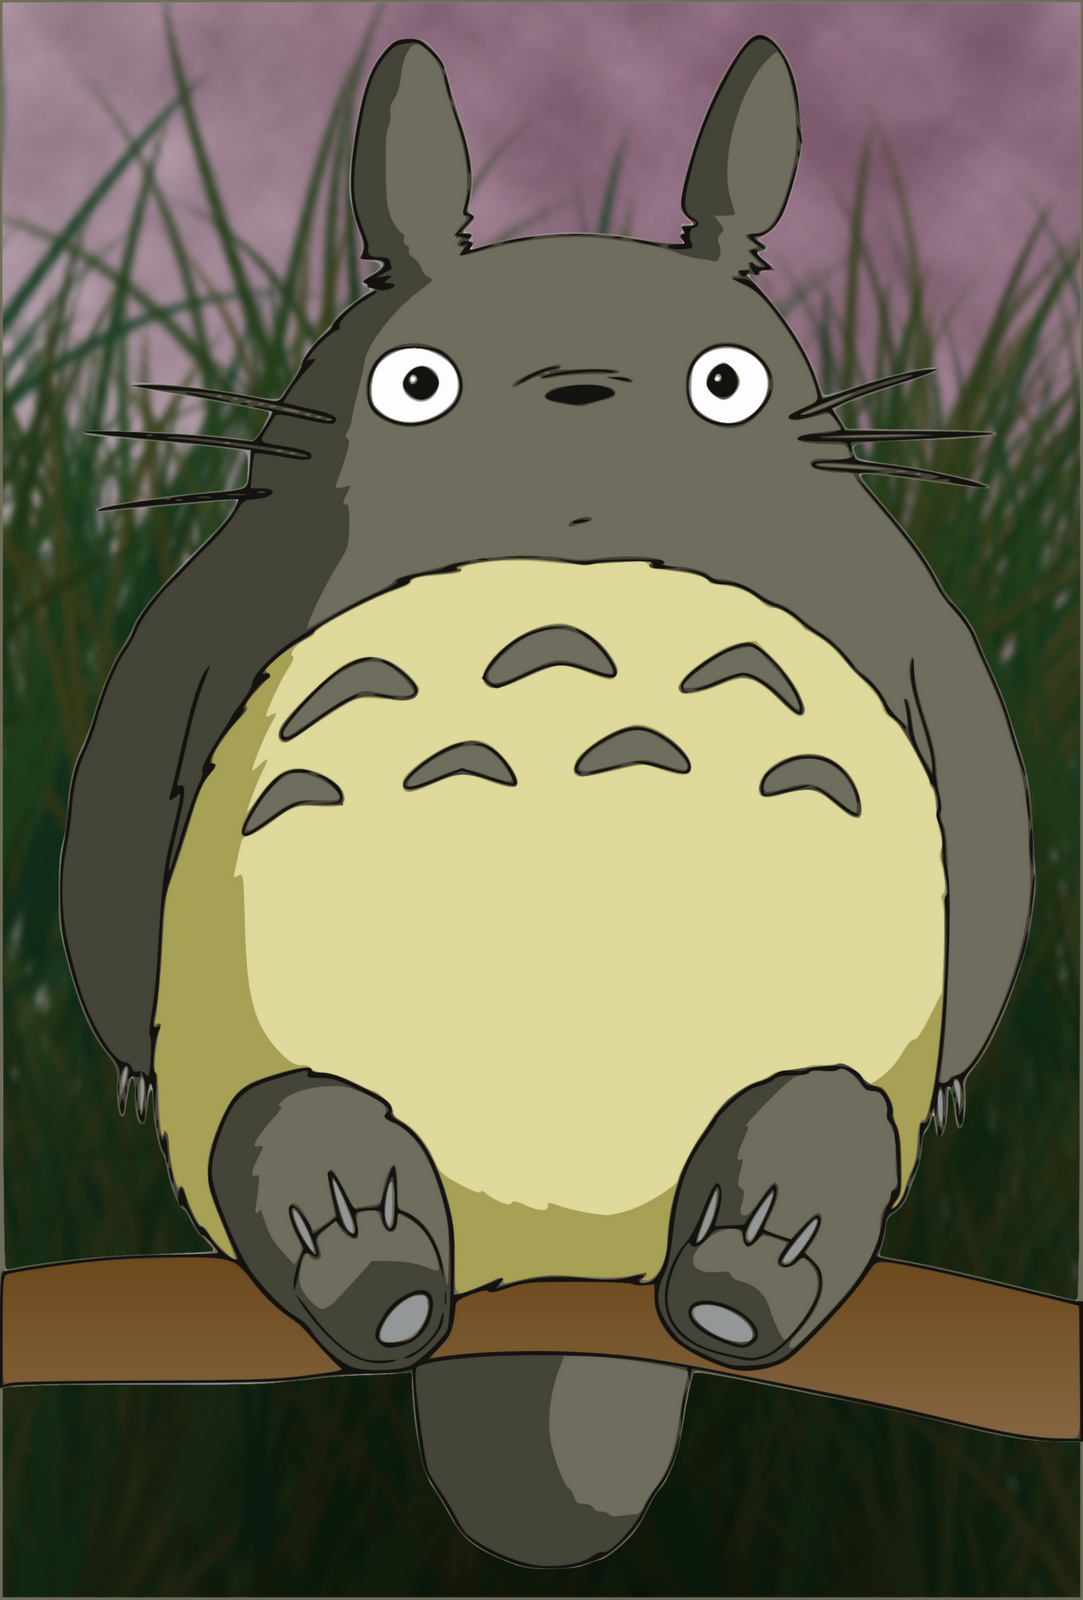 Sew Leslie: Additional Totoro Details